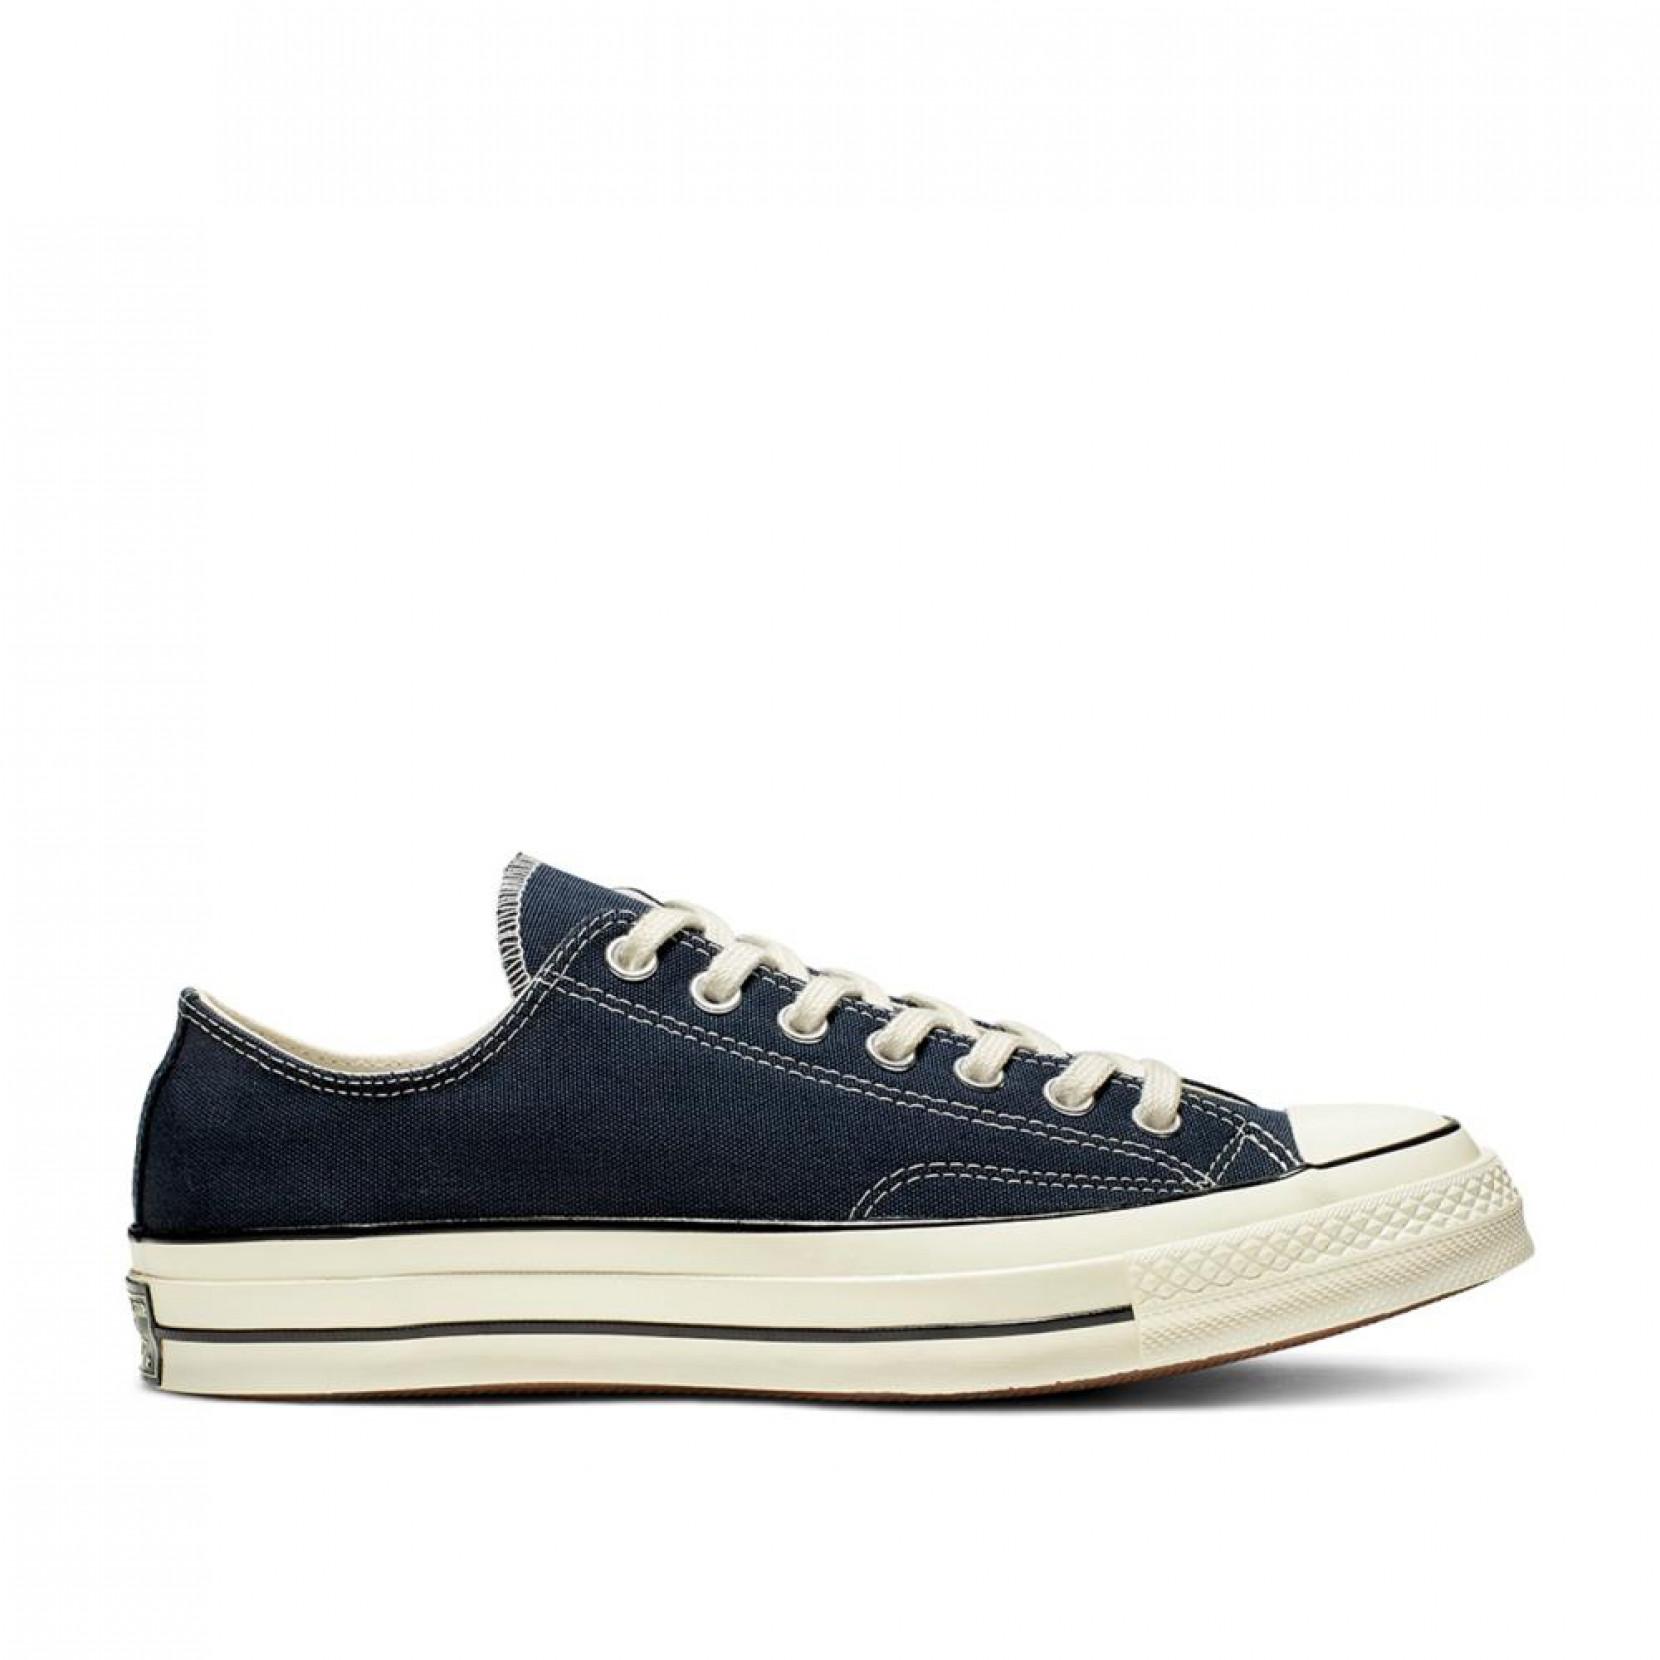 Converse 70's Chuck Low 159625c (canvas) in Navy (Blue) for Men - Lyst